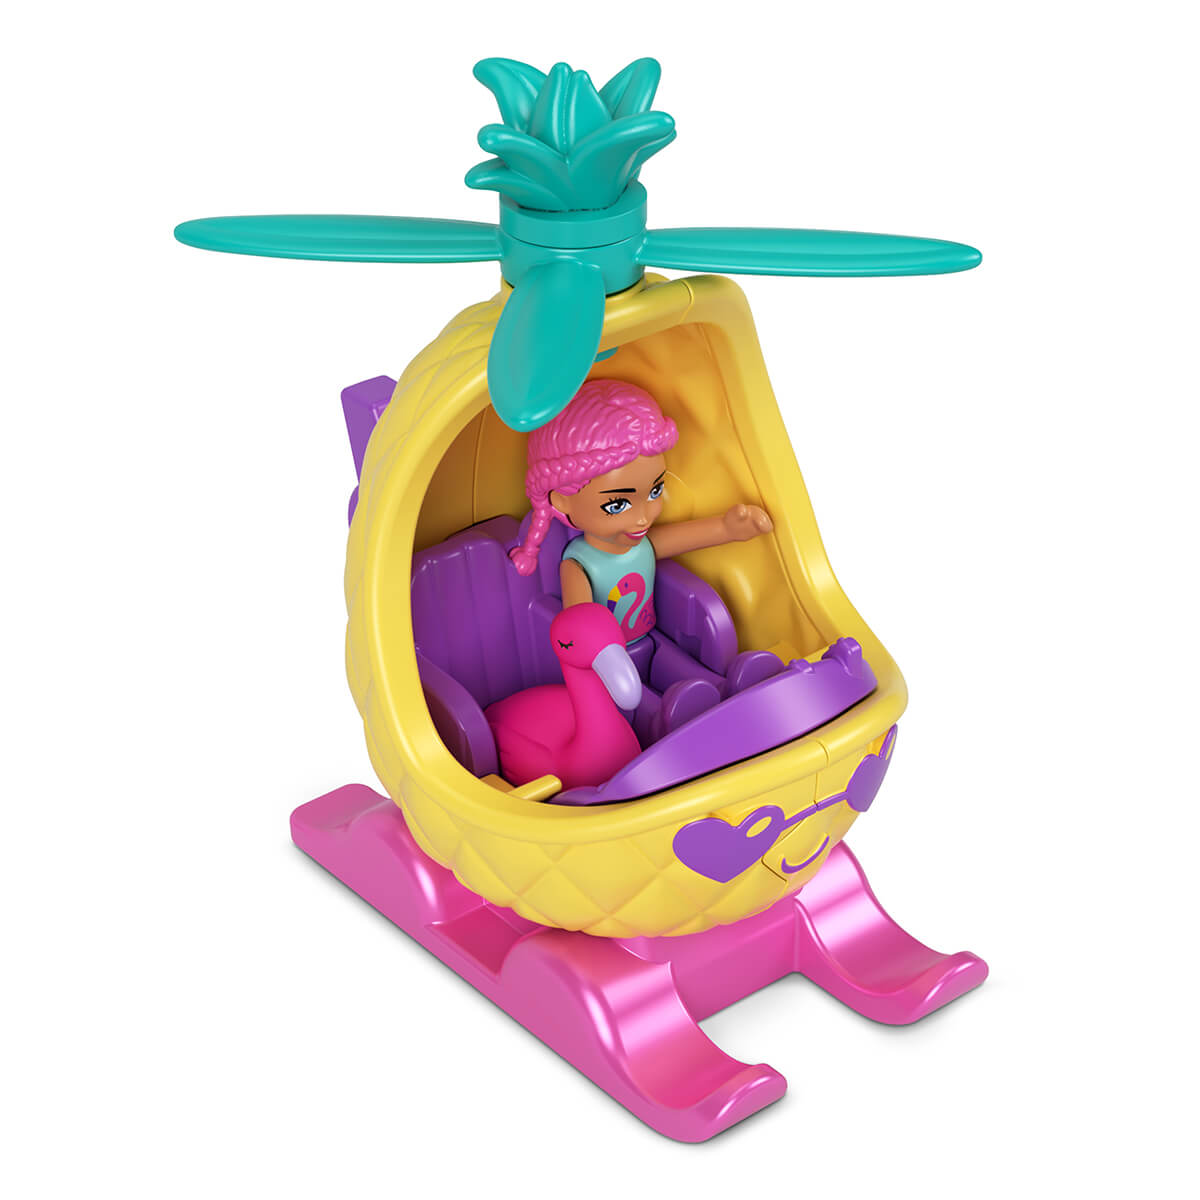 Flamingo and Polly Pocket riding in the helicopter